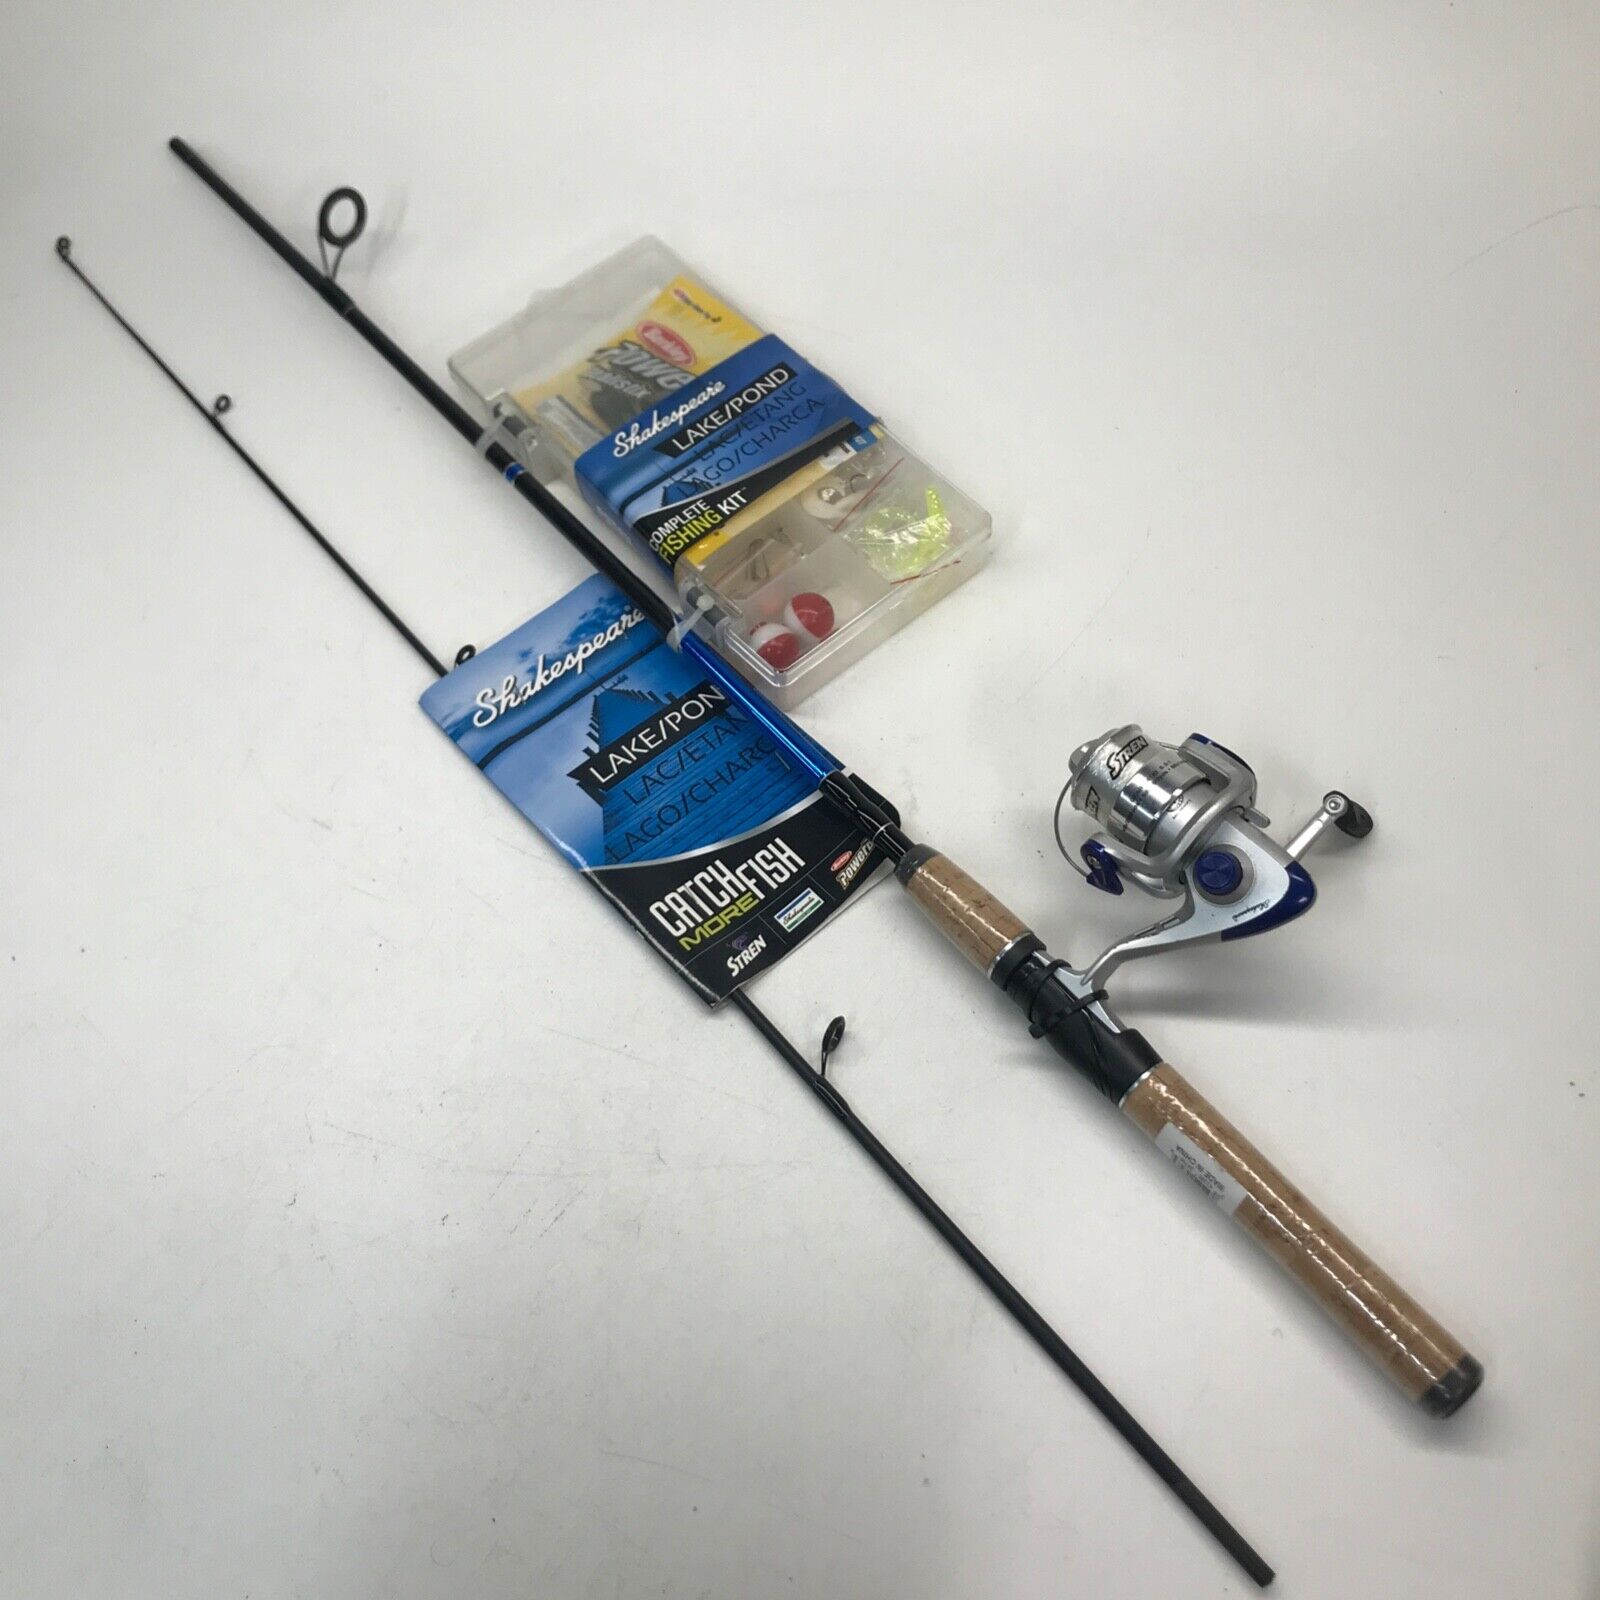 Shakespeare Catch More Fish 6' Rod & Reel Combo Lake & Pond